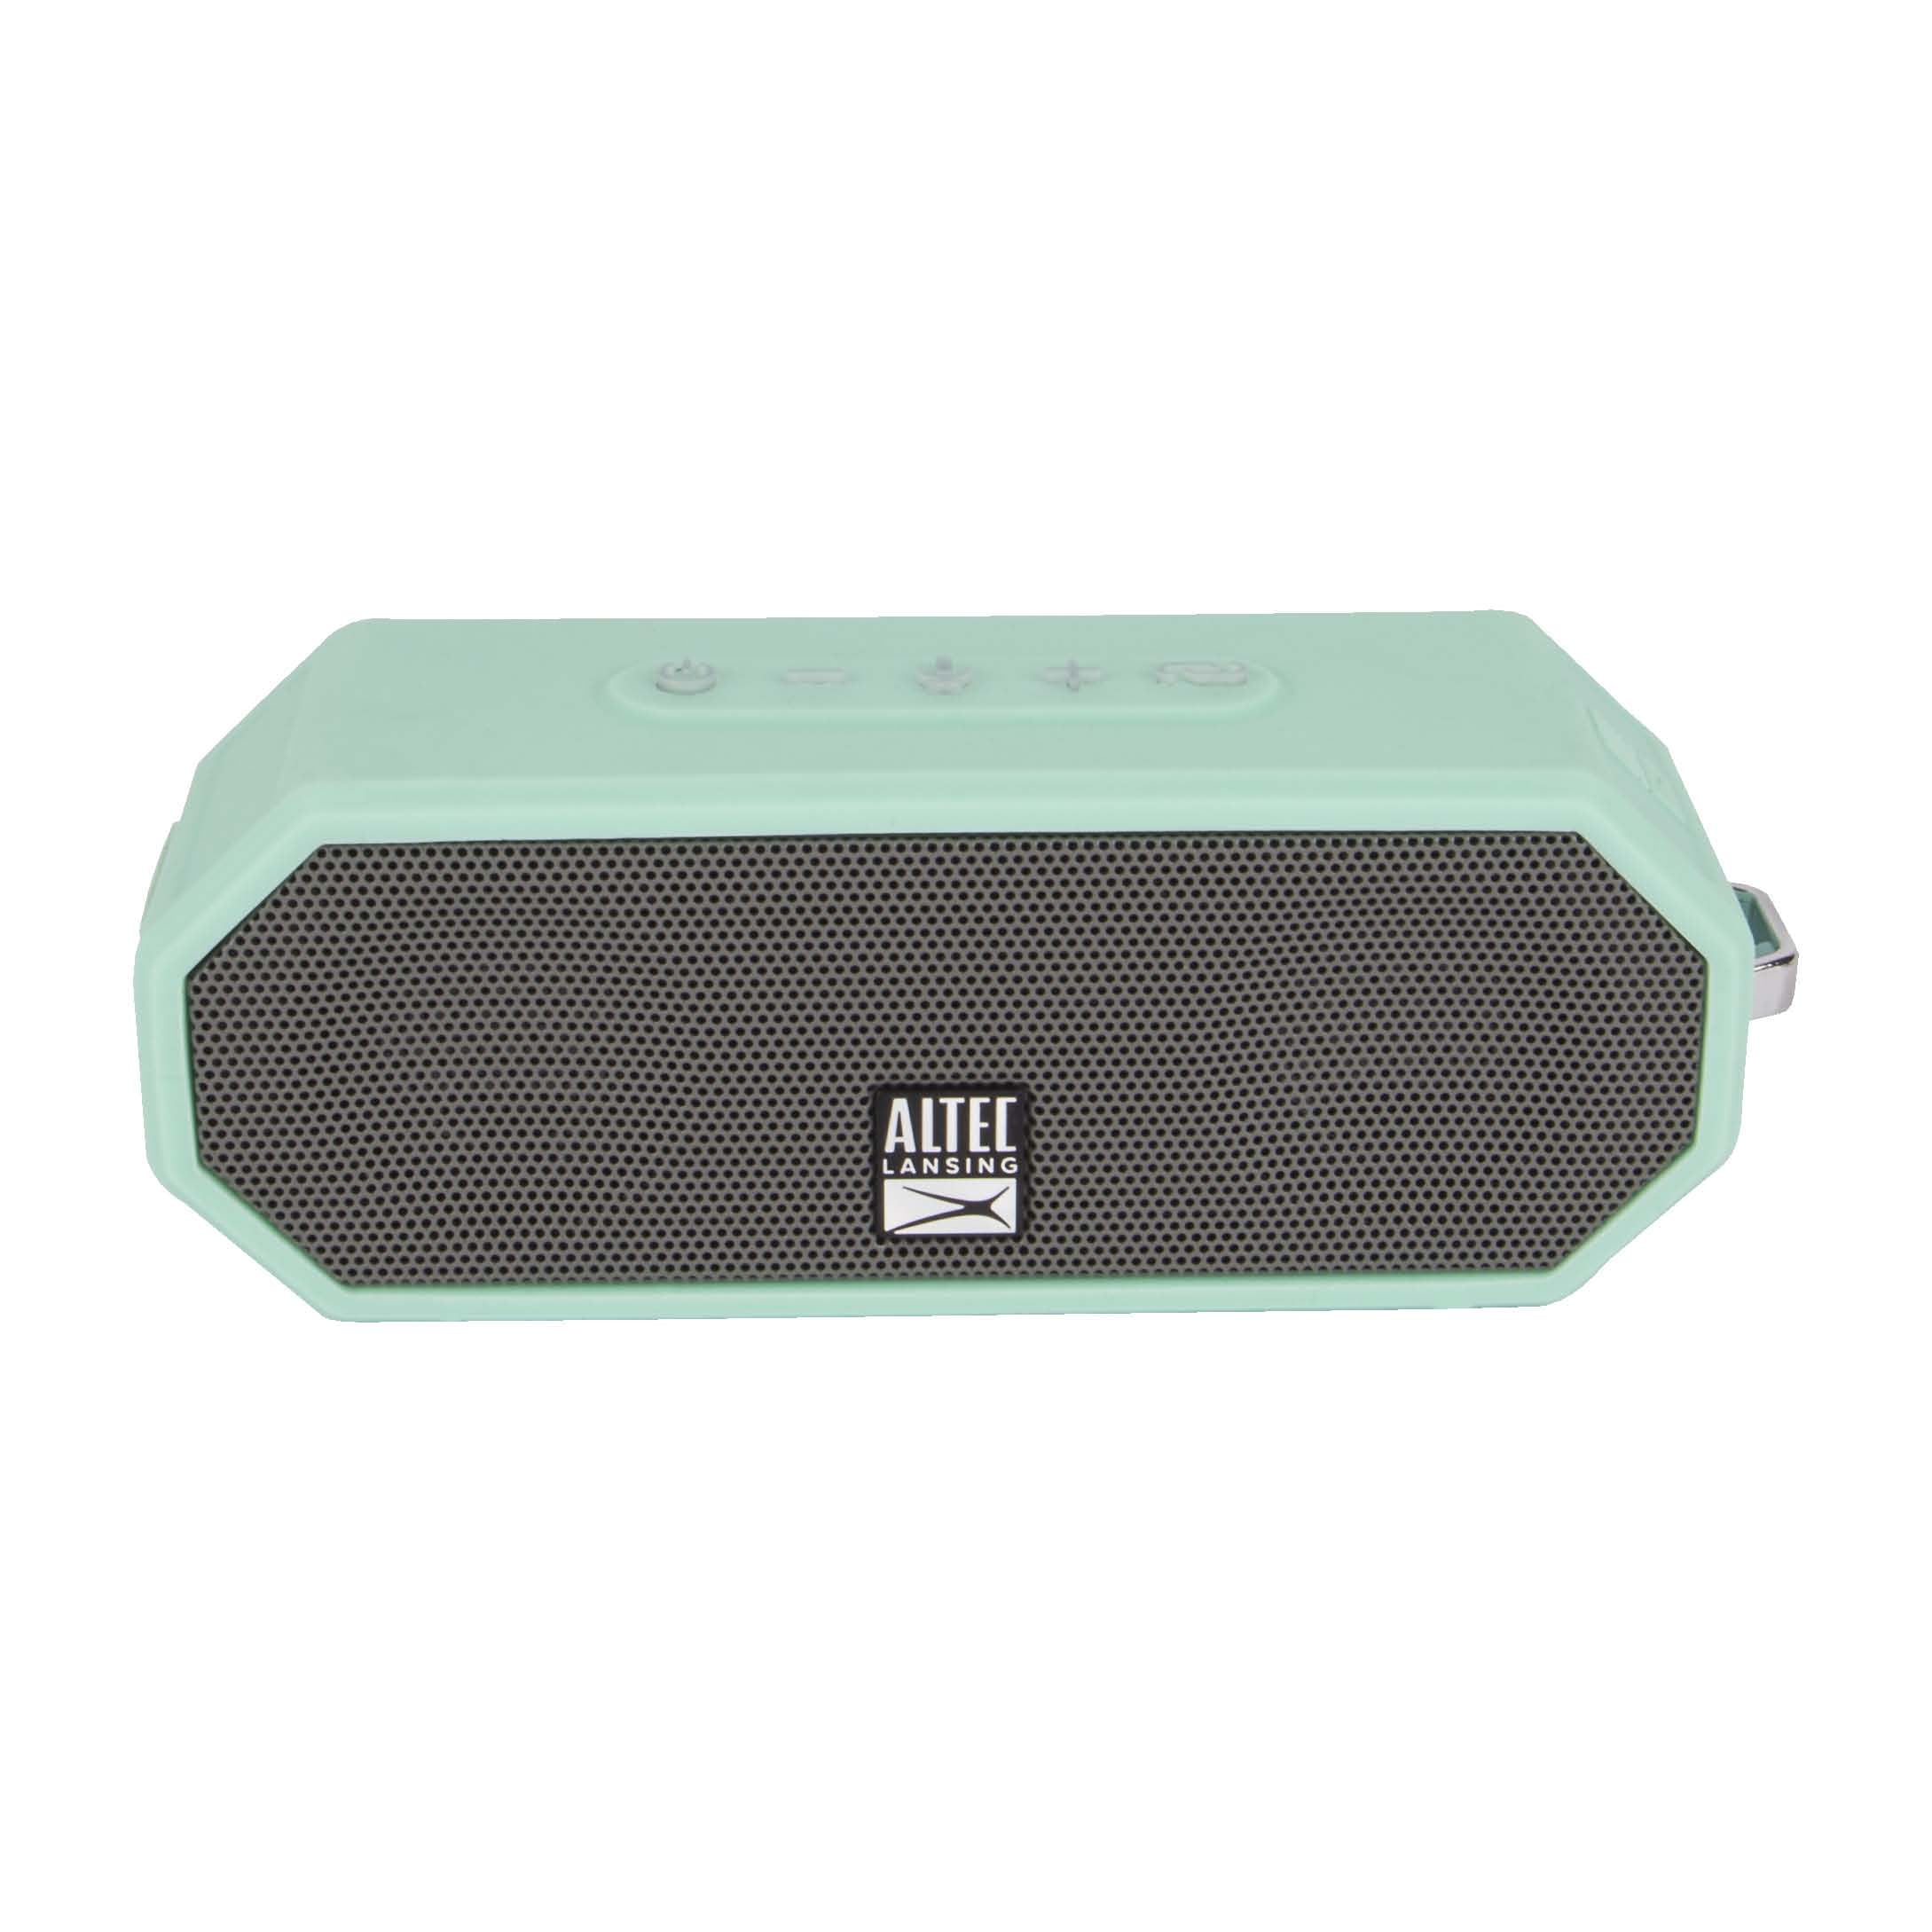 BLK Altec Lansing IMW449 Jacket H2O 4 Rugged Floating Ultra Portable Bluetooth Waterproof Speaker with up to 10 Hours of Battery Life 100FT Wireless Range and Voice Assistant Integration 